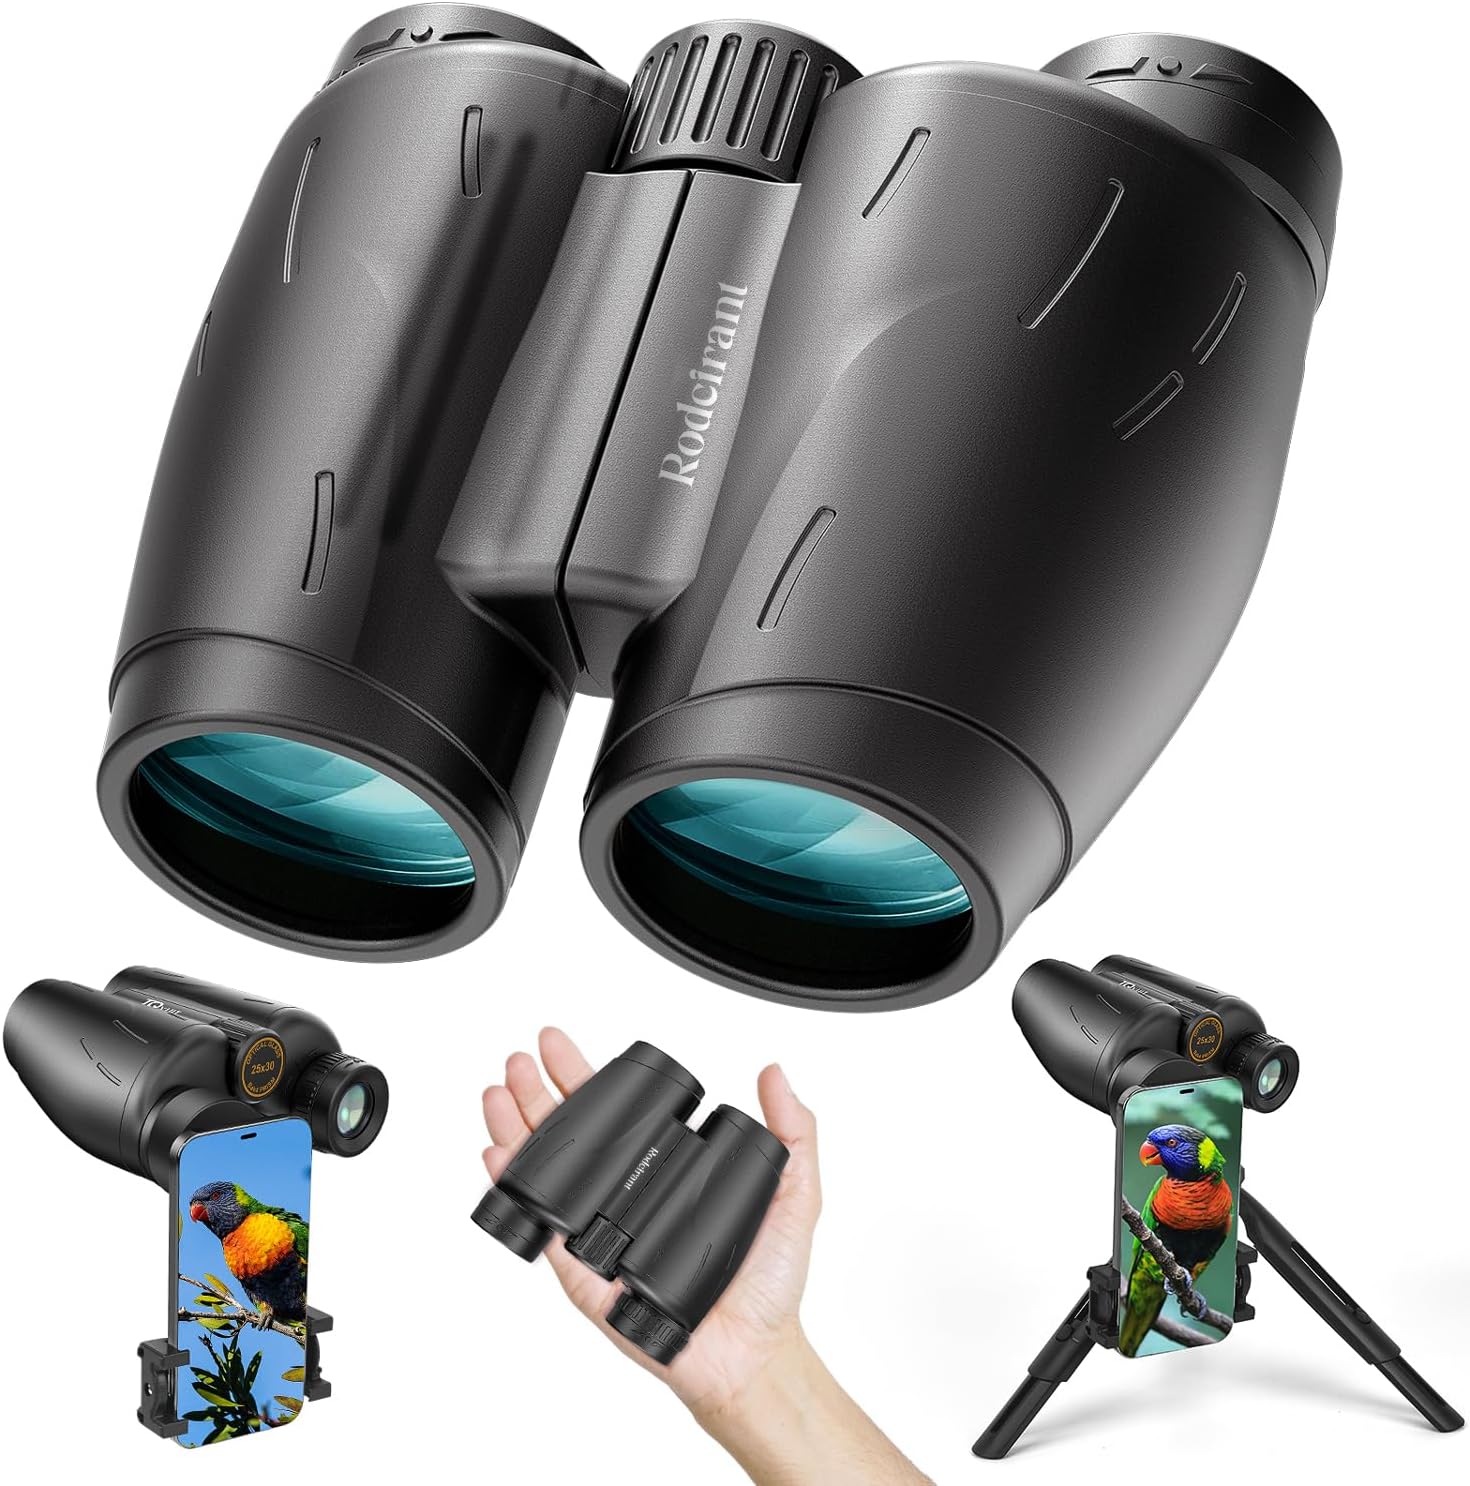 25X30 High Powered Binoculars with Phone Adapter, Tripod, Waterproof - For Adults Bird Watching, Hunting, Concerts